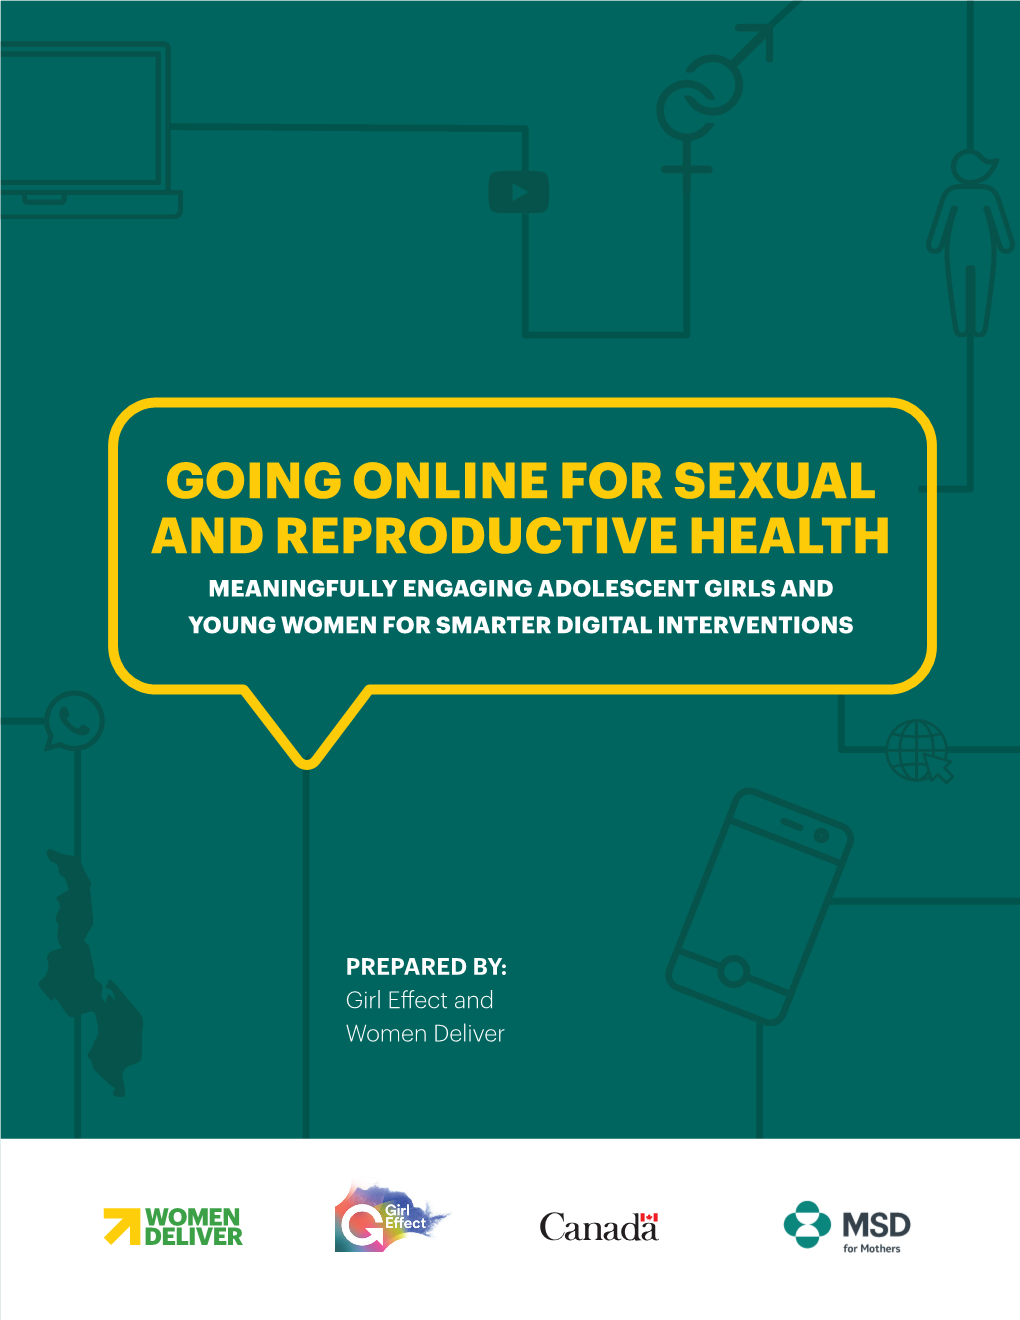 Going Online for Sexual and Reproductive Health Meaningfully Engaging Adolescent Girls and Young Women for Smarter Digital Interventions